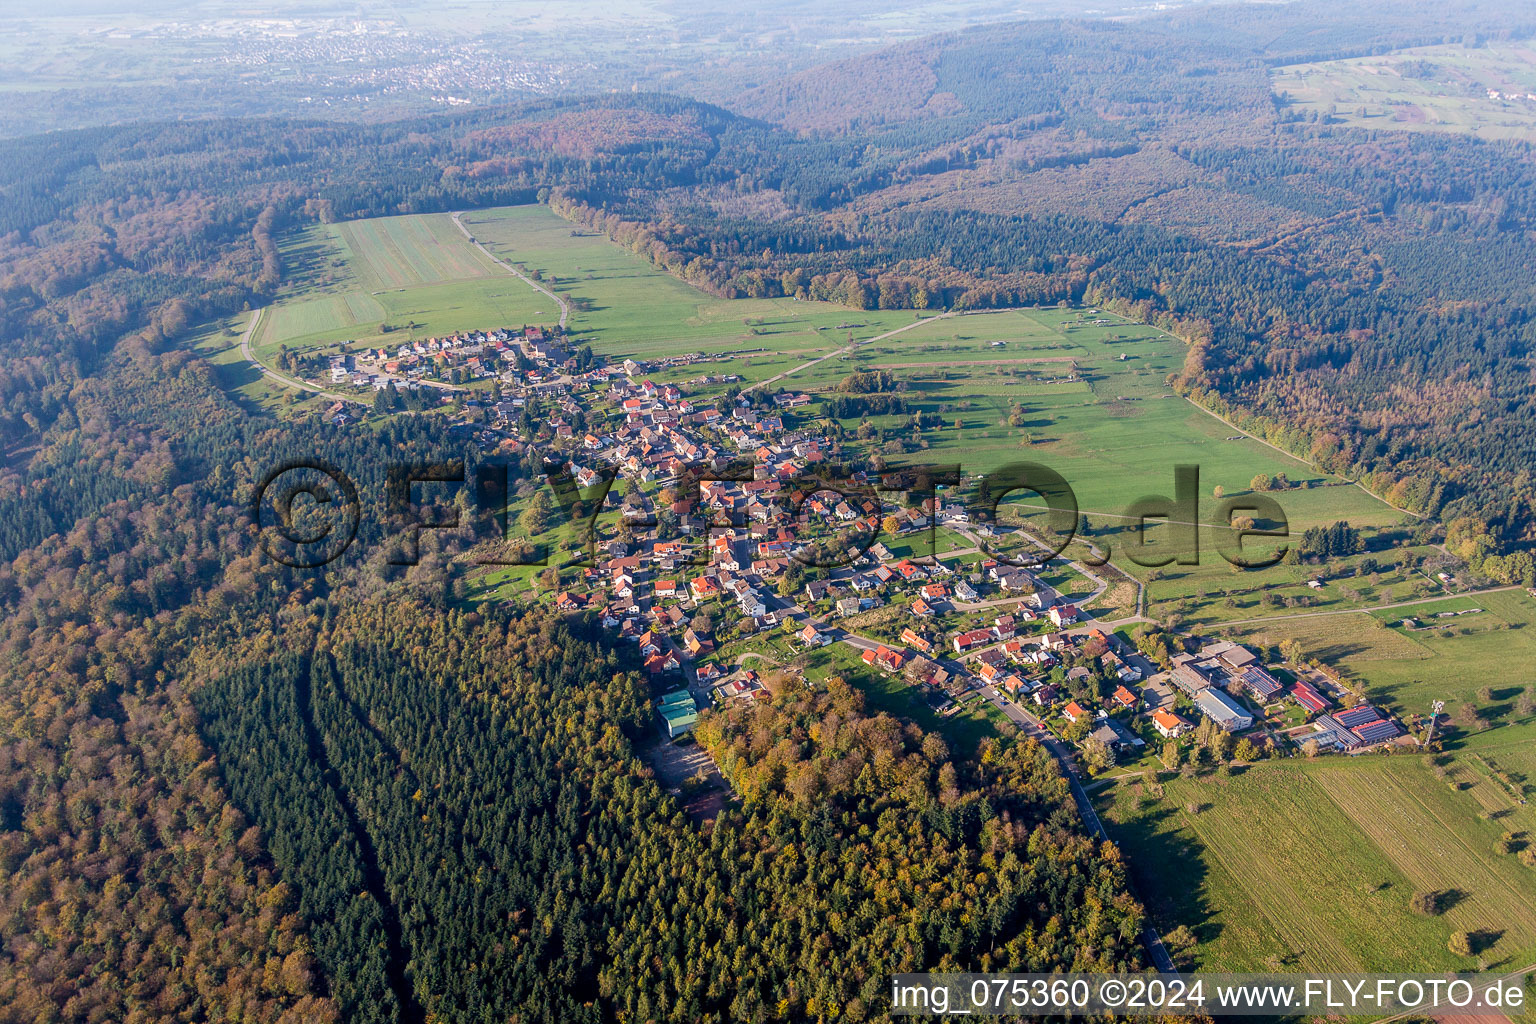 Village - view on the edge of agricultural fields and farmland in the district Freiolsheim in Gaggenau in the state Baden-Wurttemberg, Germany